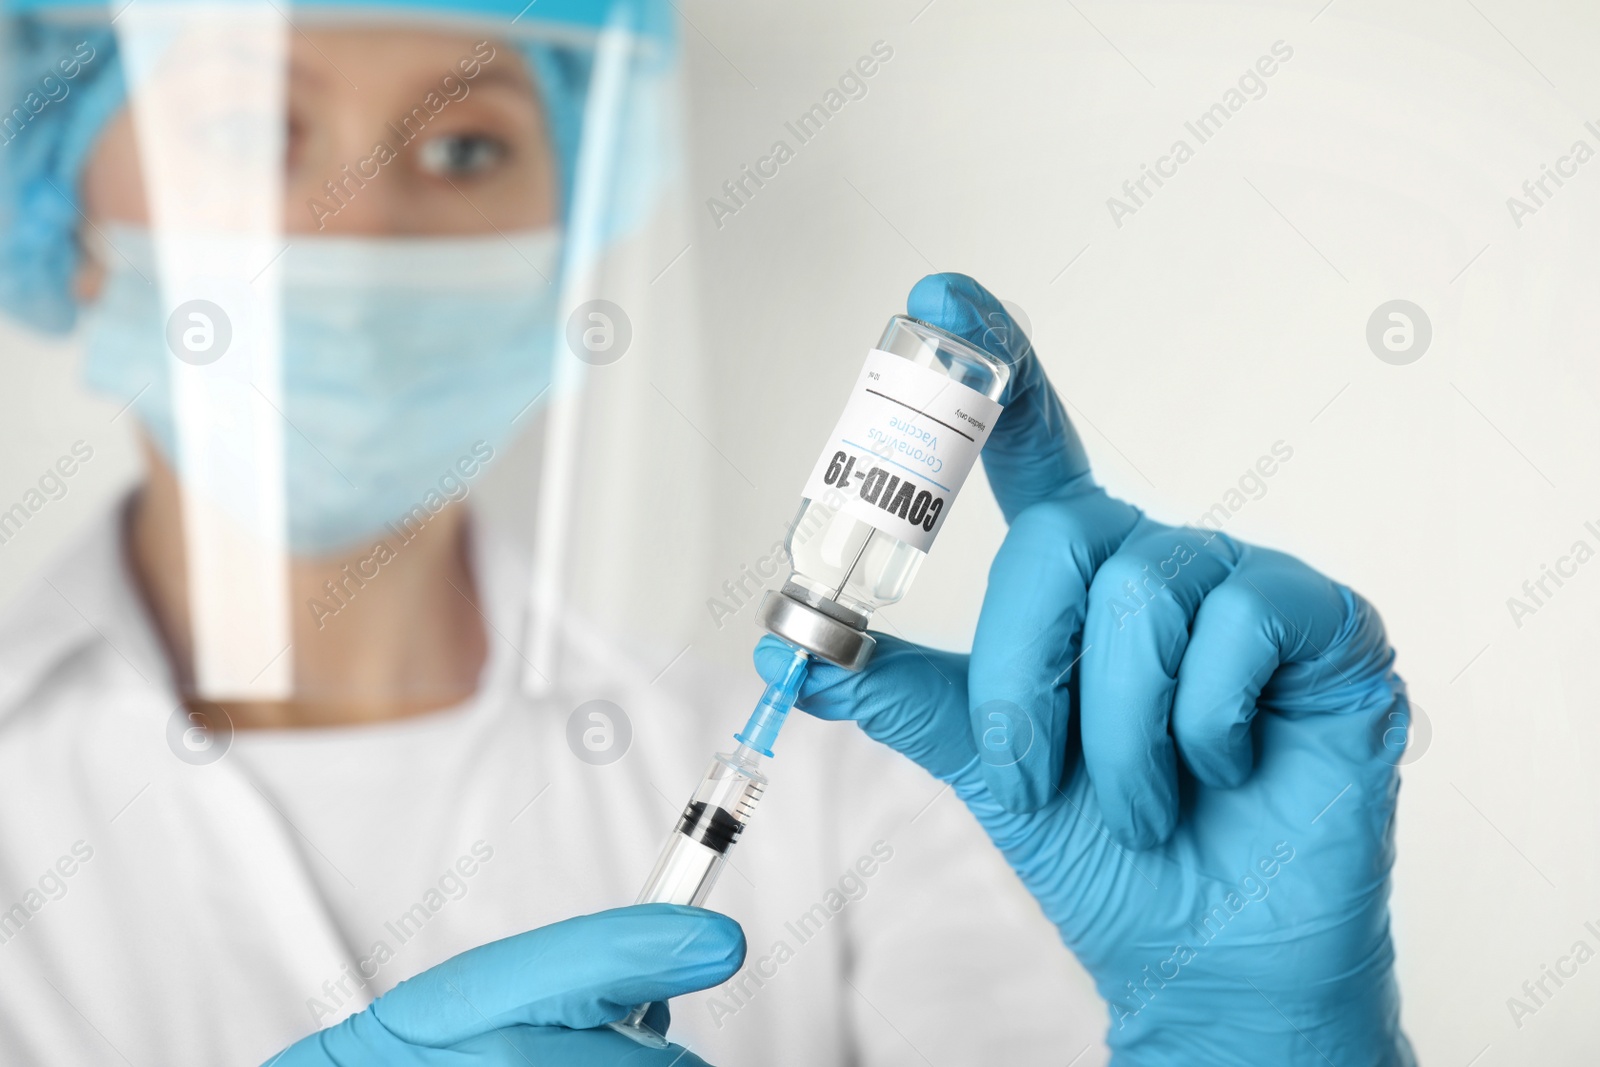 Photo of Doctor filling syringe with Covid-19 vaccine against white background, focus on hands